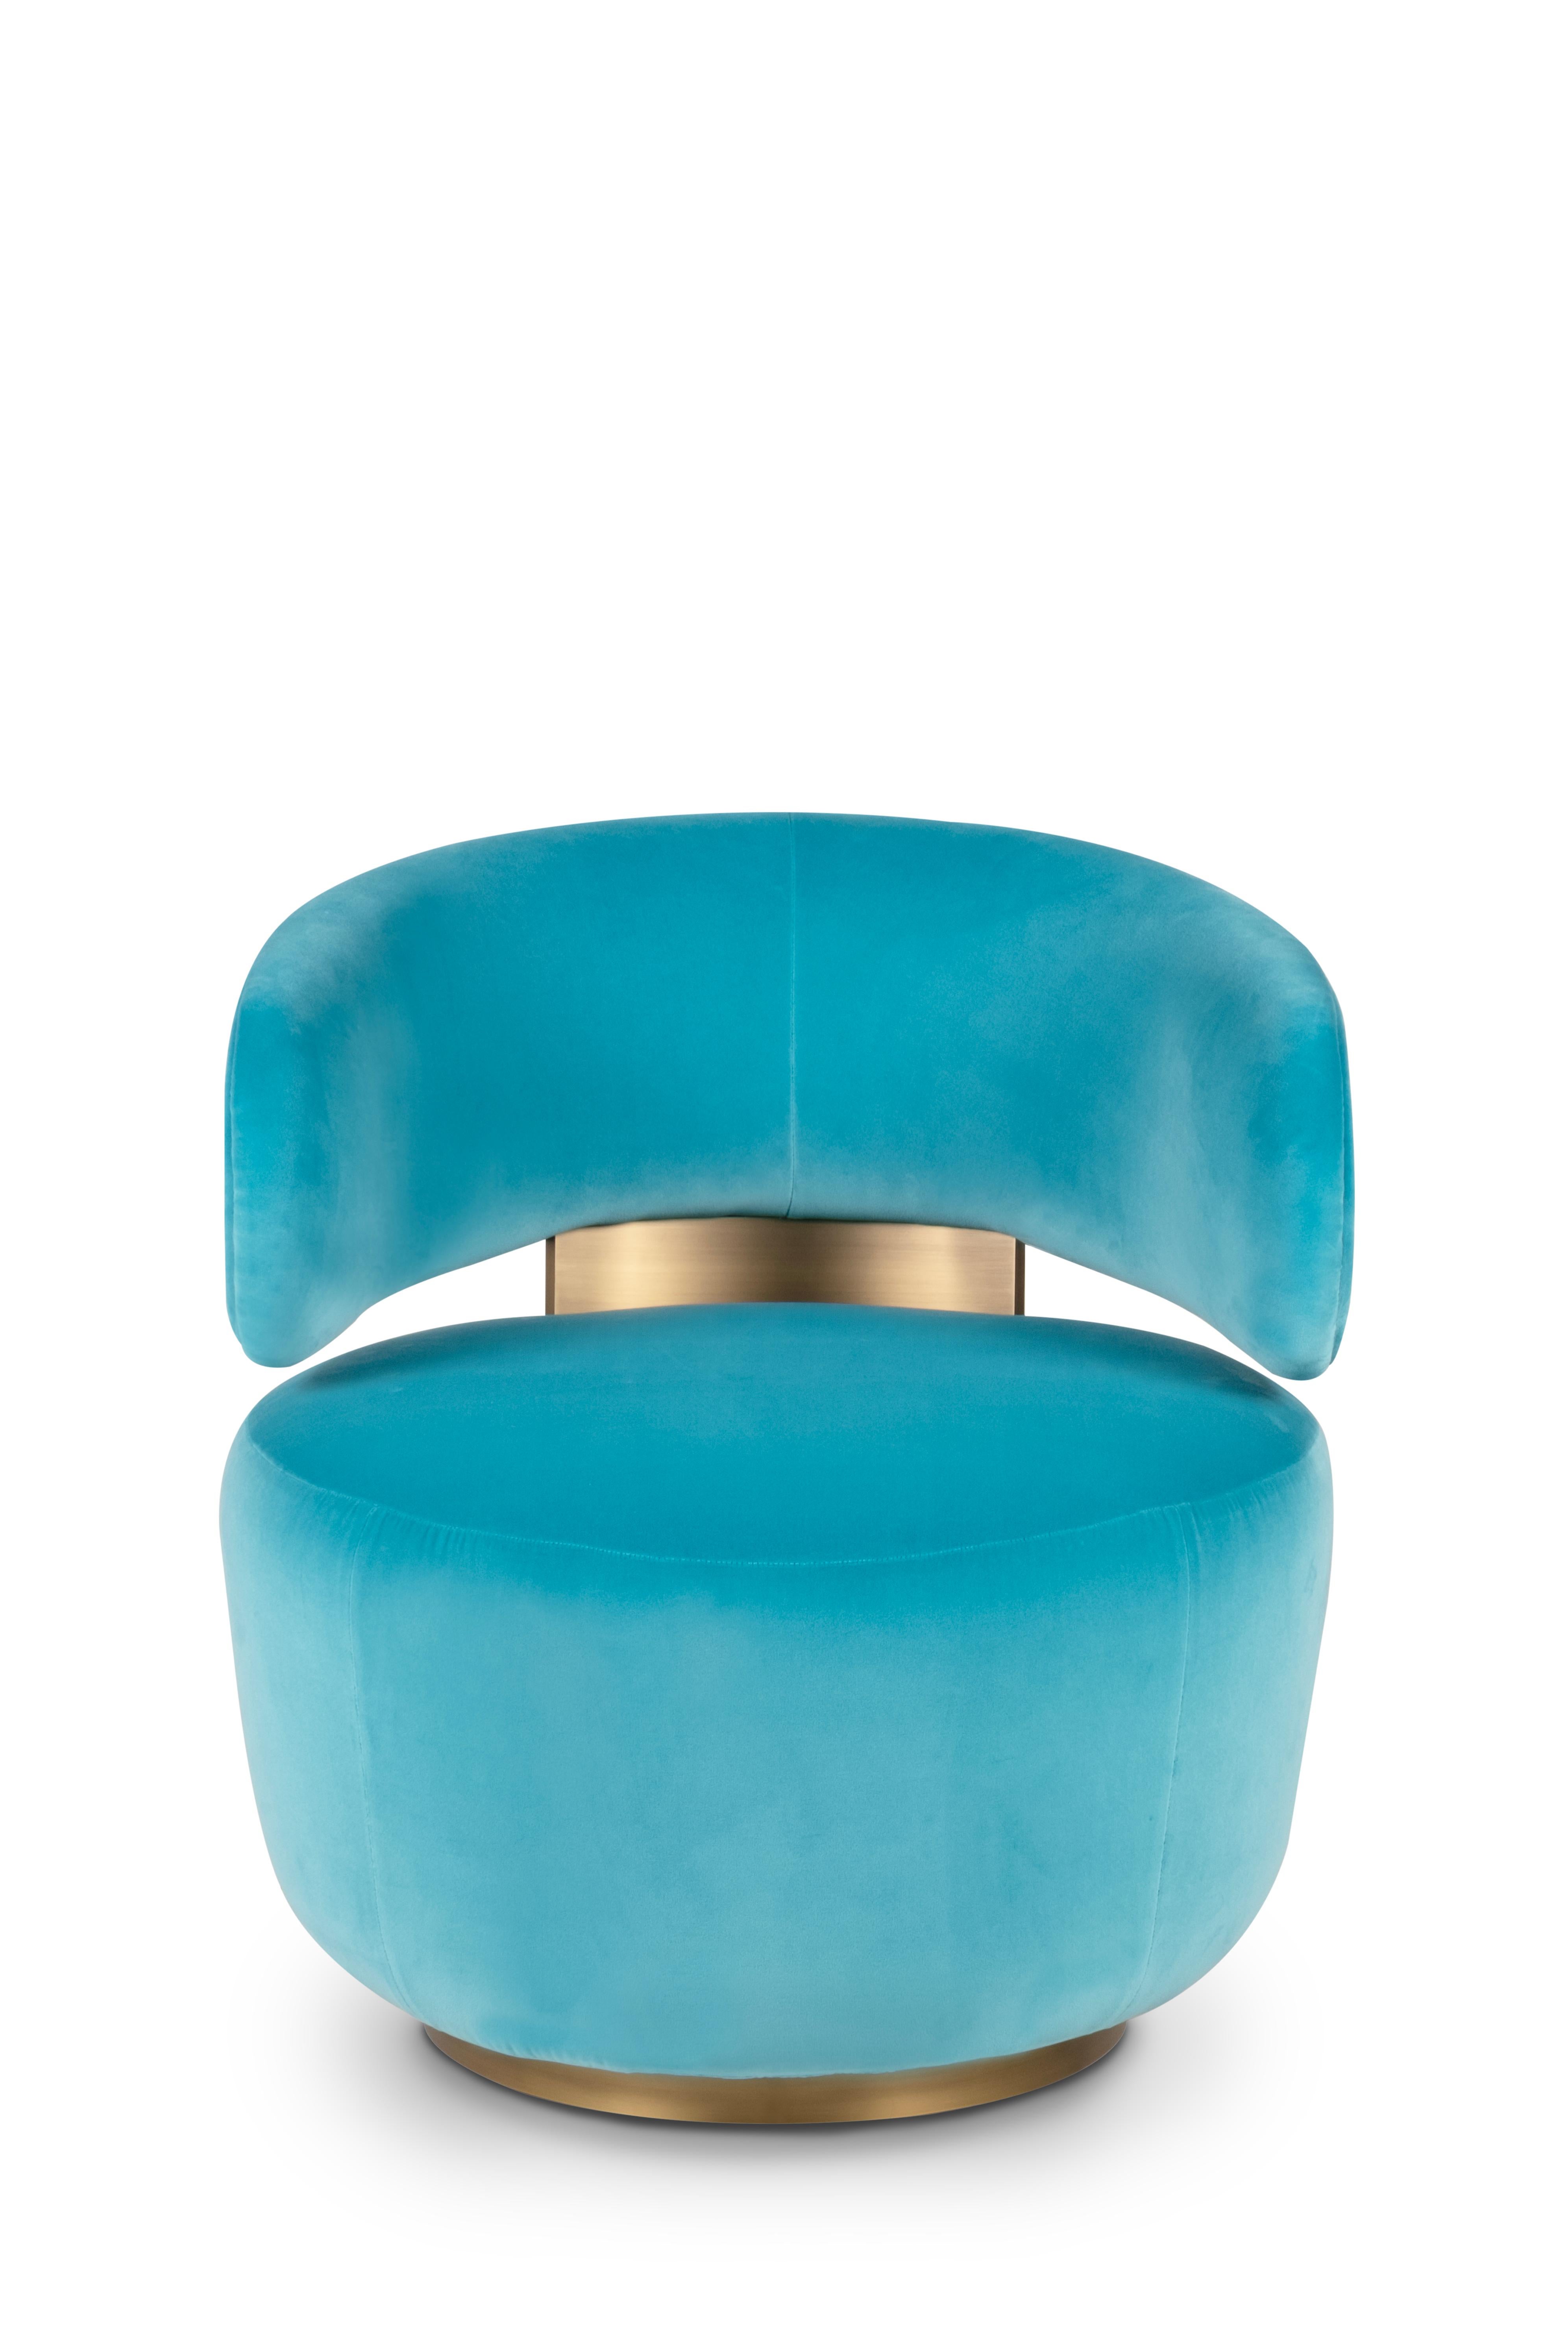 Caju Swivel Lounge Chair, Contemporary Collection, Handcrafted in Portugal - Europe by Greenapple.

The Caju lounge chair stands as a trendy furniture piece that personifies the organic shape of a cashew. Upholstered in Turquoise velvet, the design